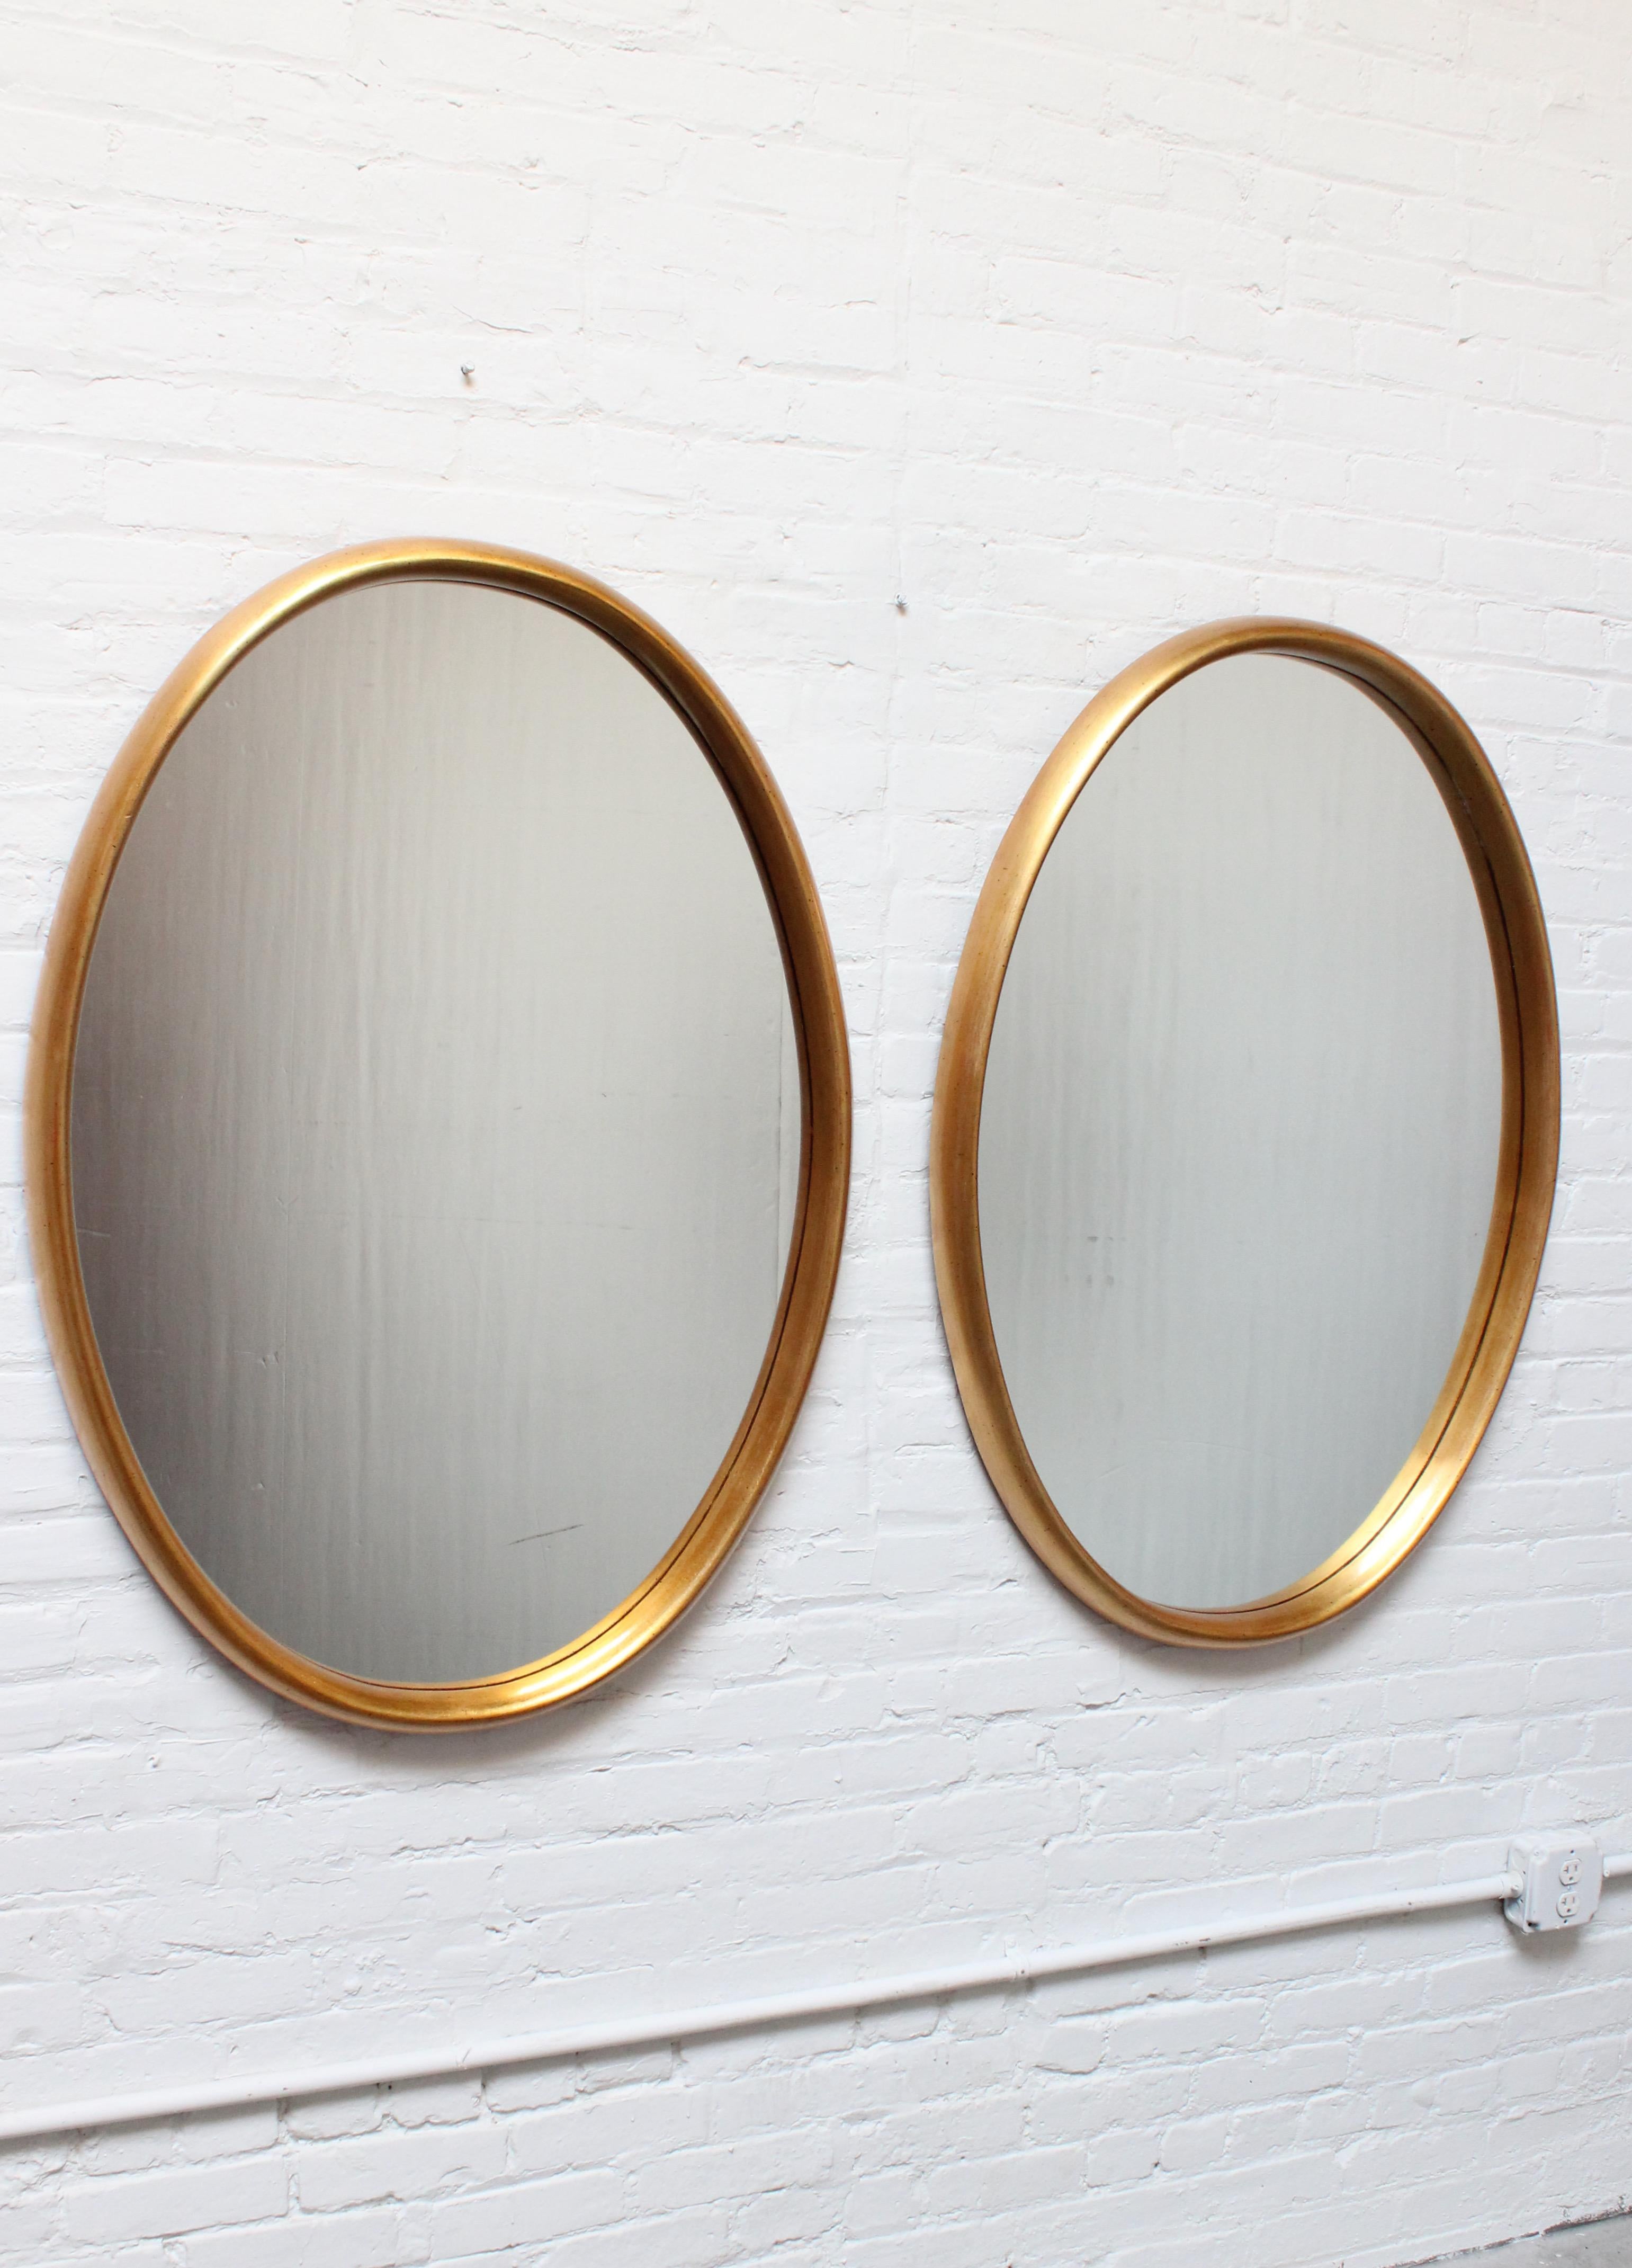 Pair of wide, oval-form Labarge mirrors composed of inset glass within deep, gold leaf frames. There is minor wear to the glass (most notably, a light, long scuff to the right mirror's glass, as shown in the last image). Does not affect the clarity